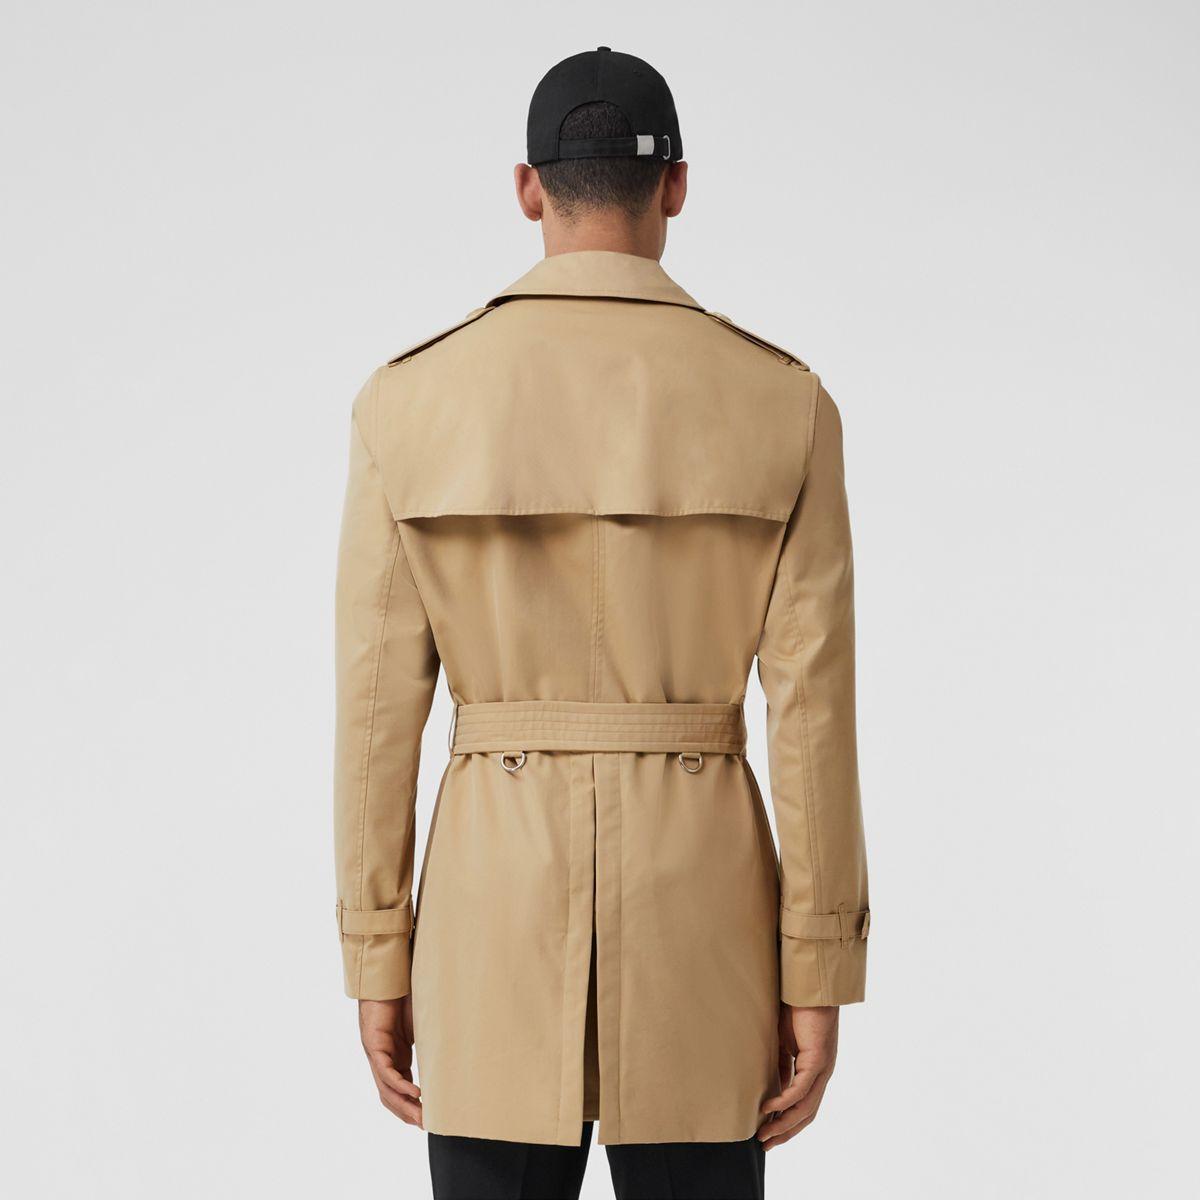 Burberry Cotton The Short Wimbledon Trench Coat in Honey (Natural) for Men  - Save 62% - Lyst